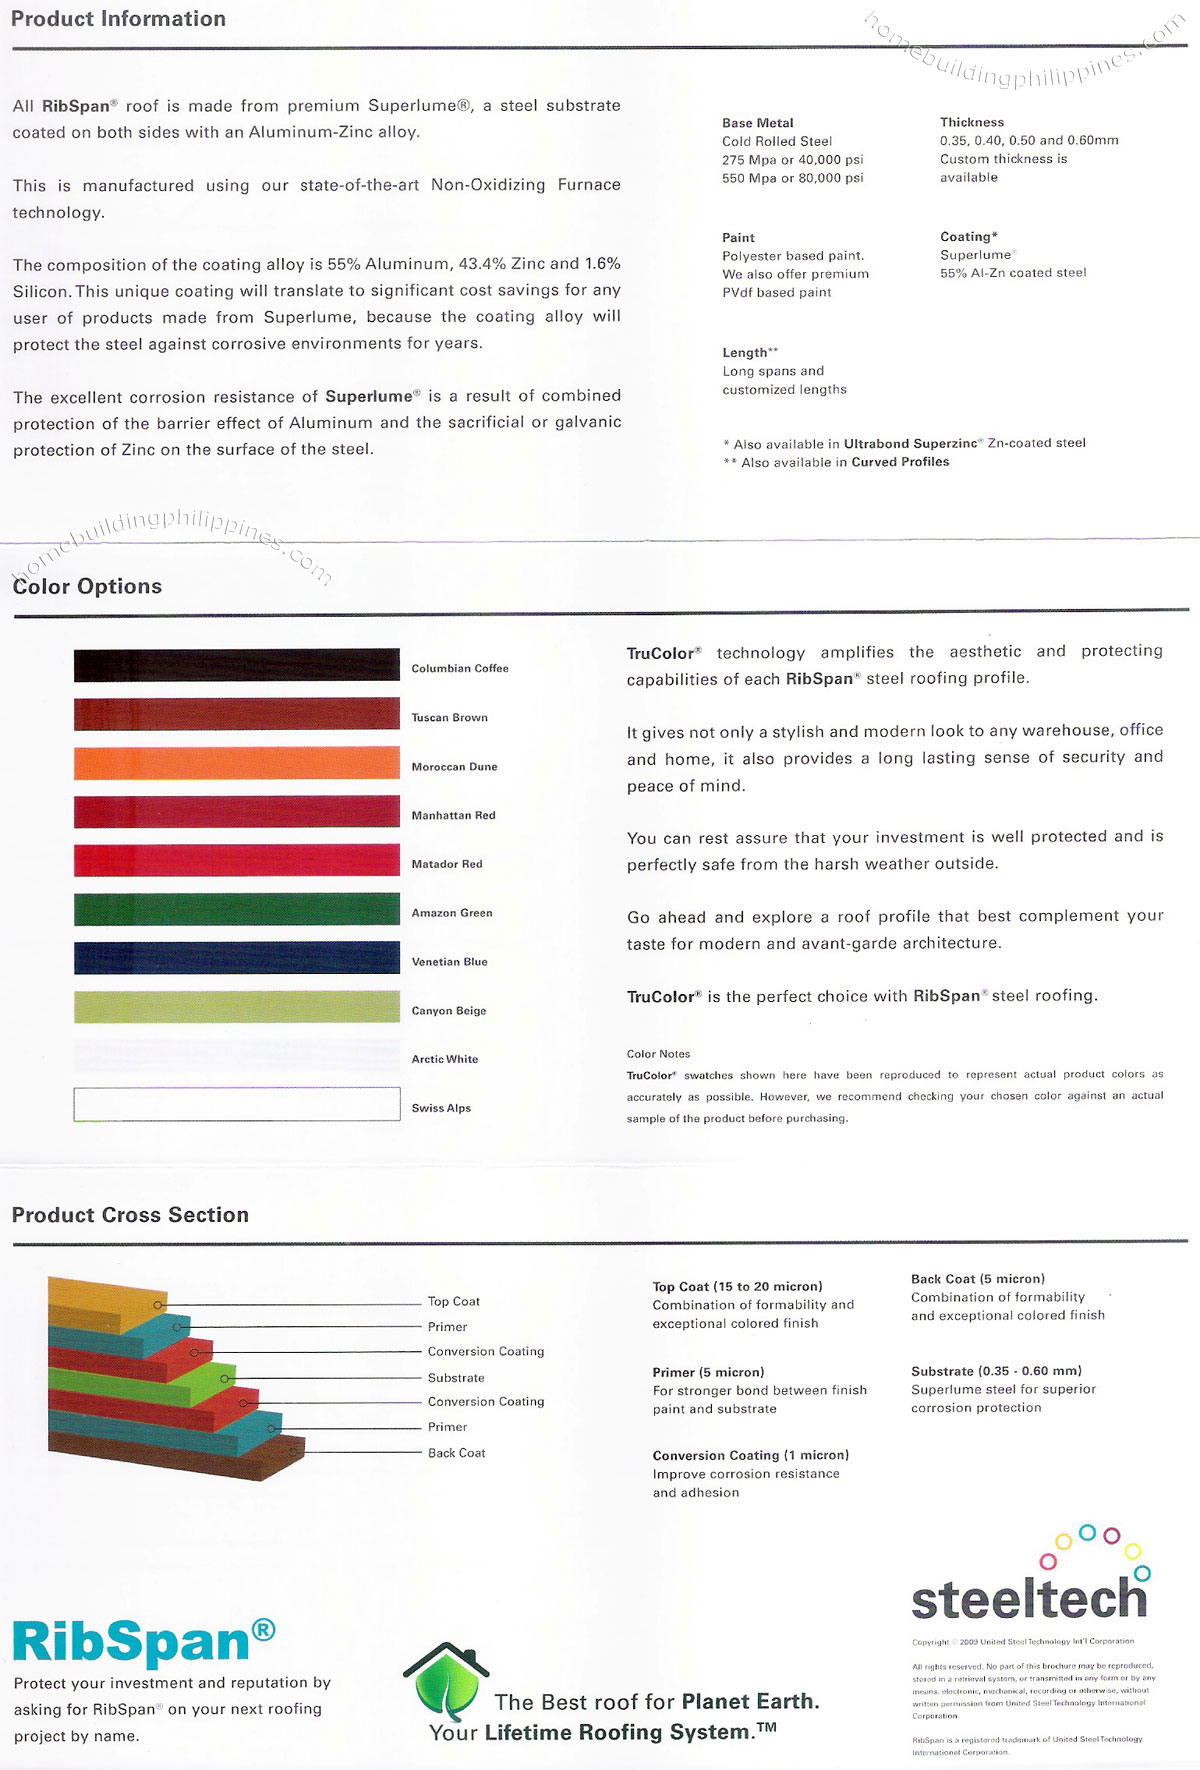 ribspan product information color options cross section